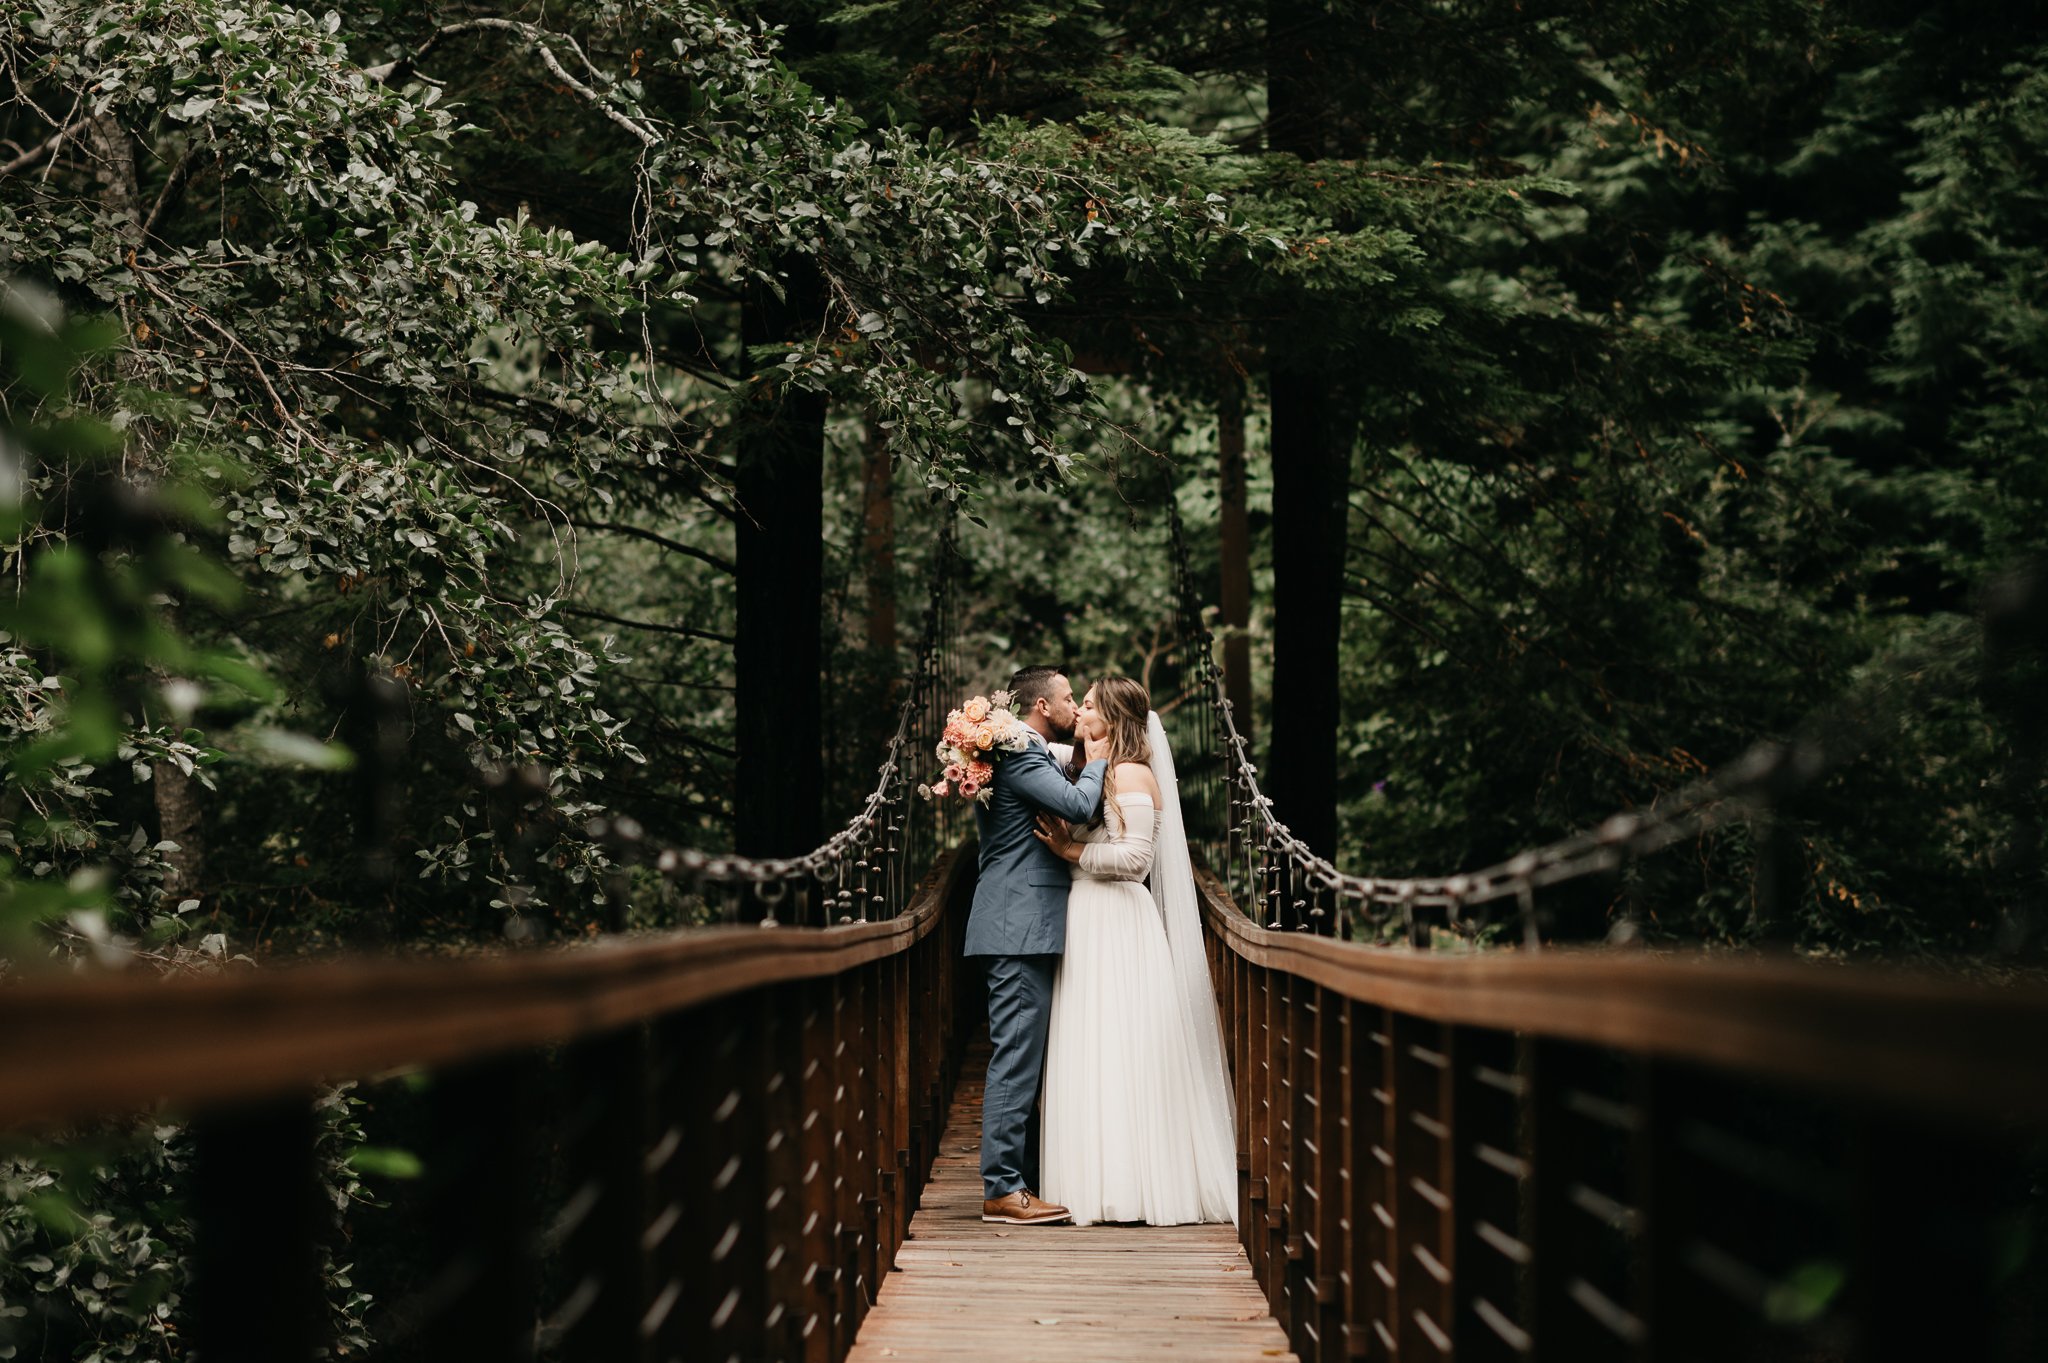 Bride and Groom in wedding attire standing on a Bridge holding hands before wedding ceremony tall redwoods in background